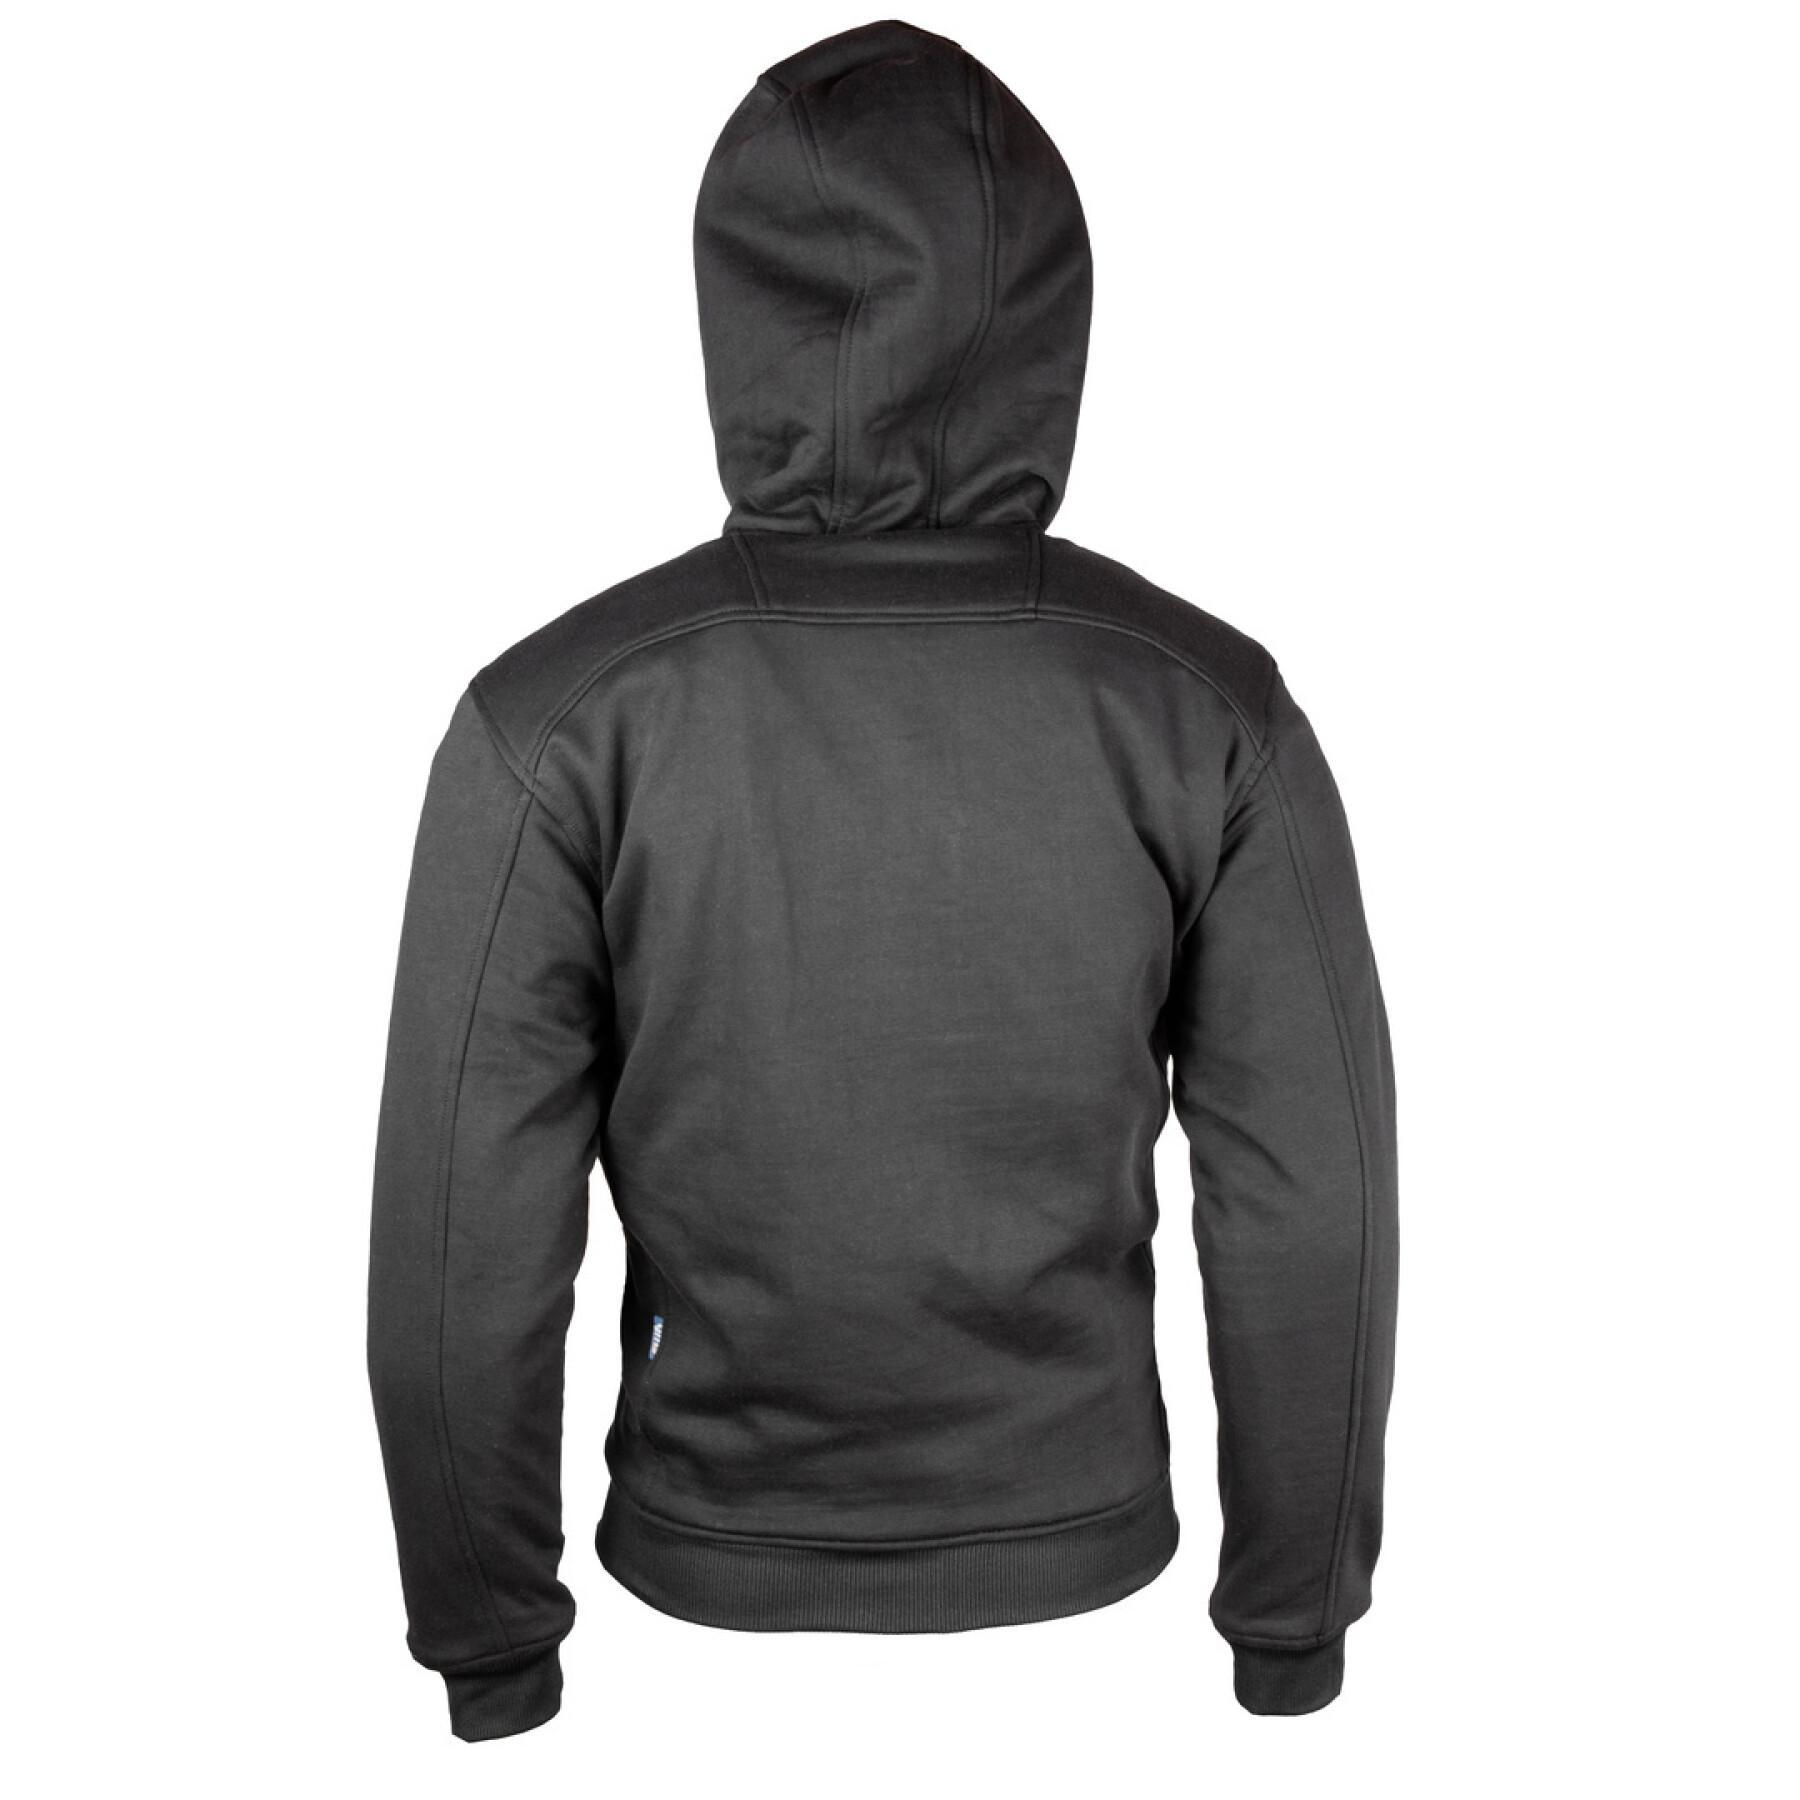 Hooded sweatshirt GMS grizzly WP